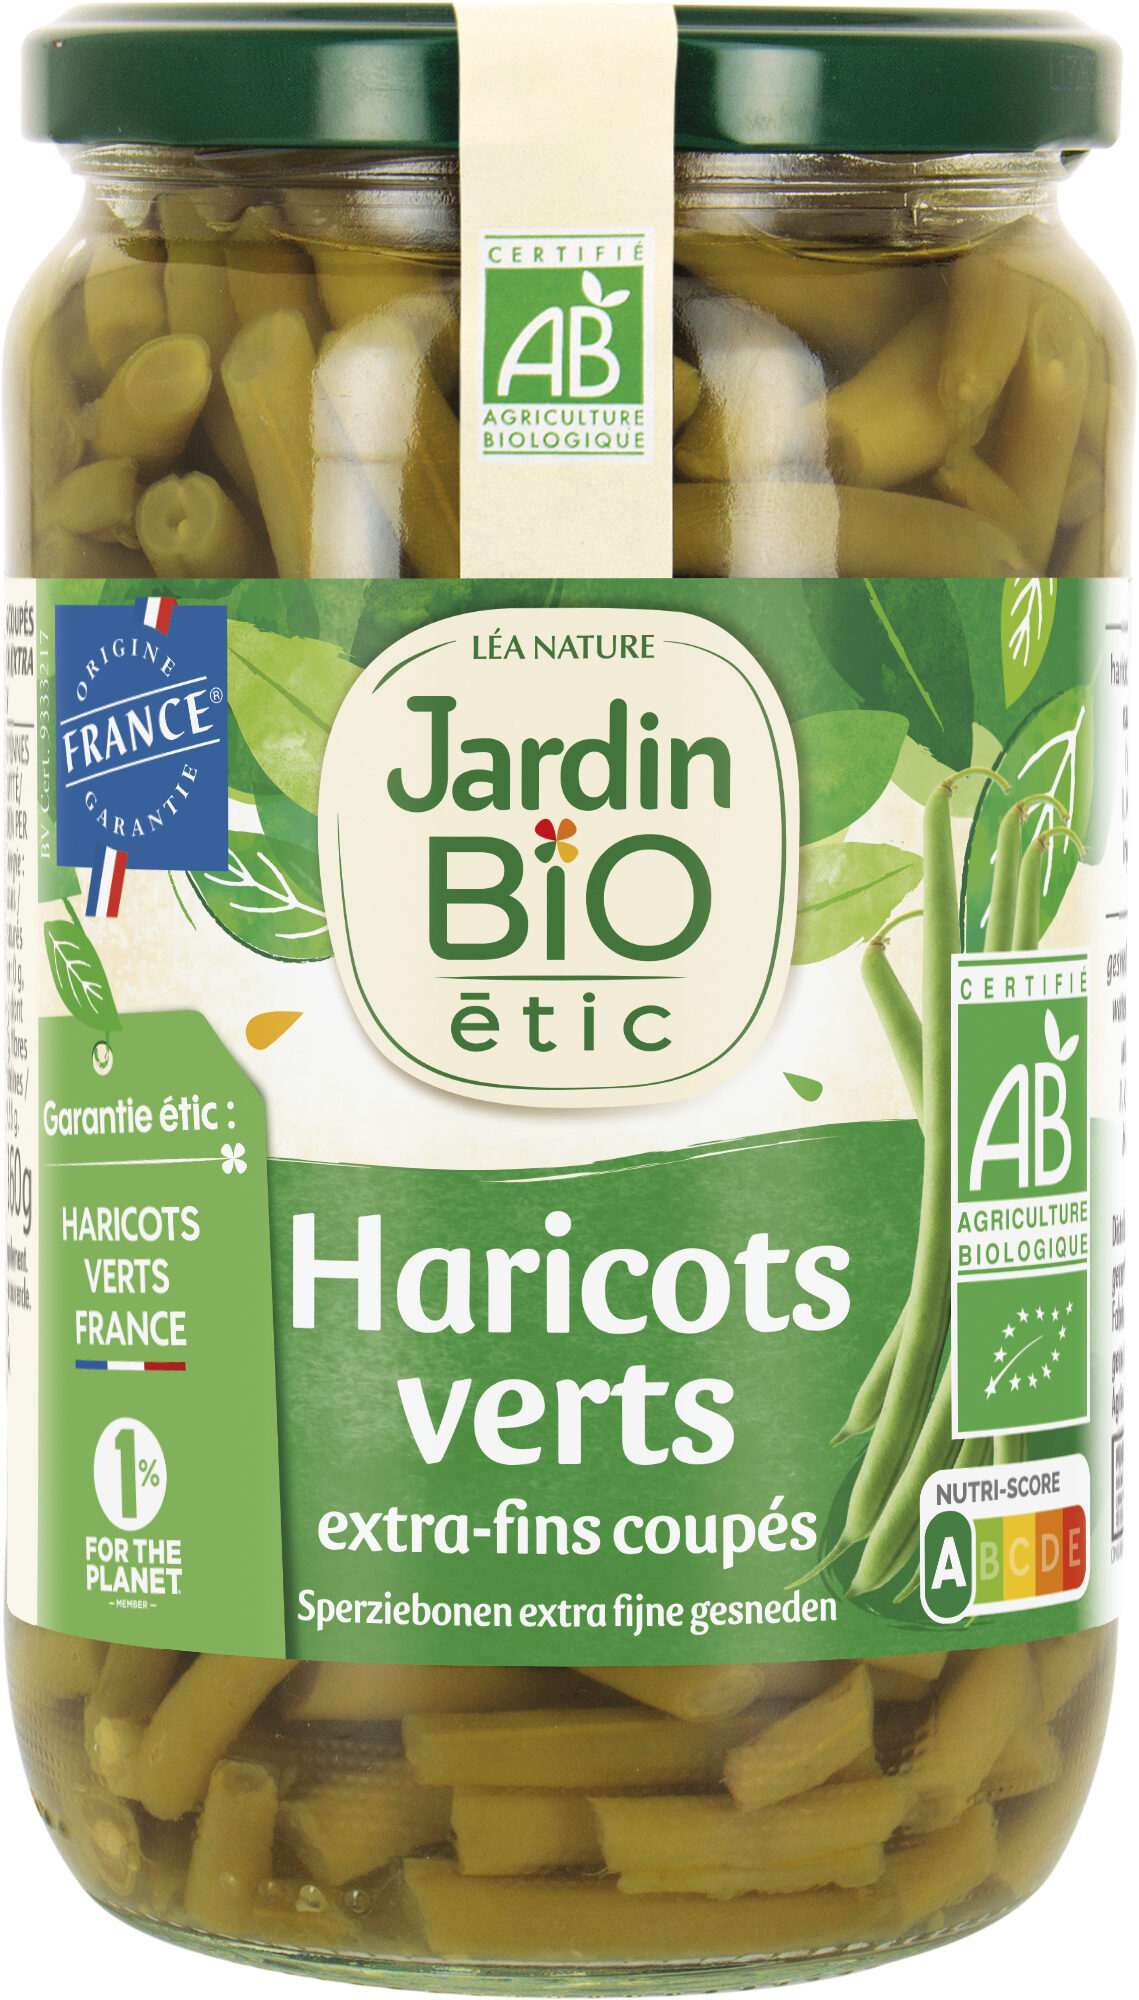 Haricots verts extra-fins coupés - Product - fr